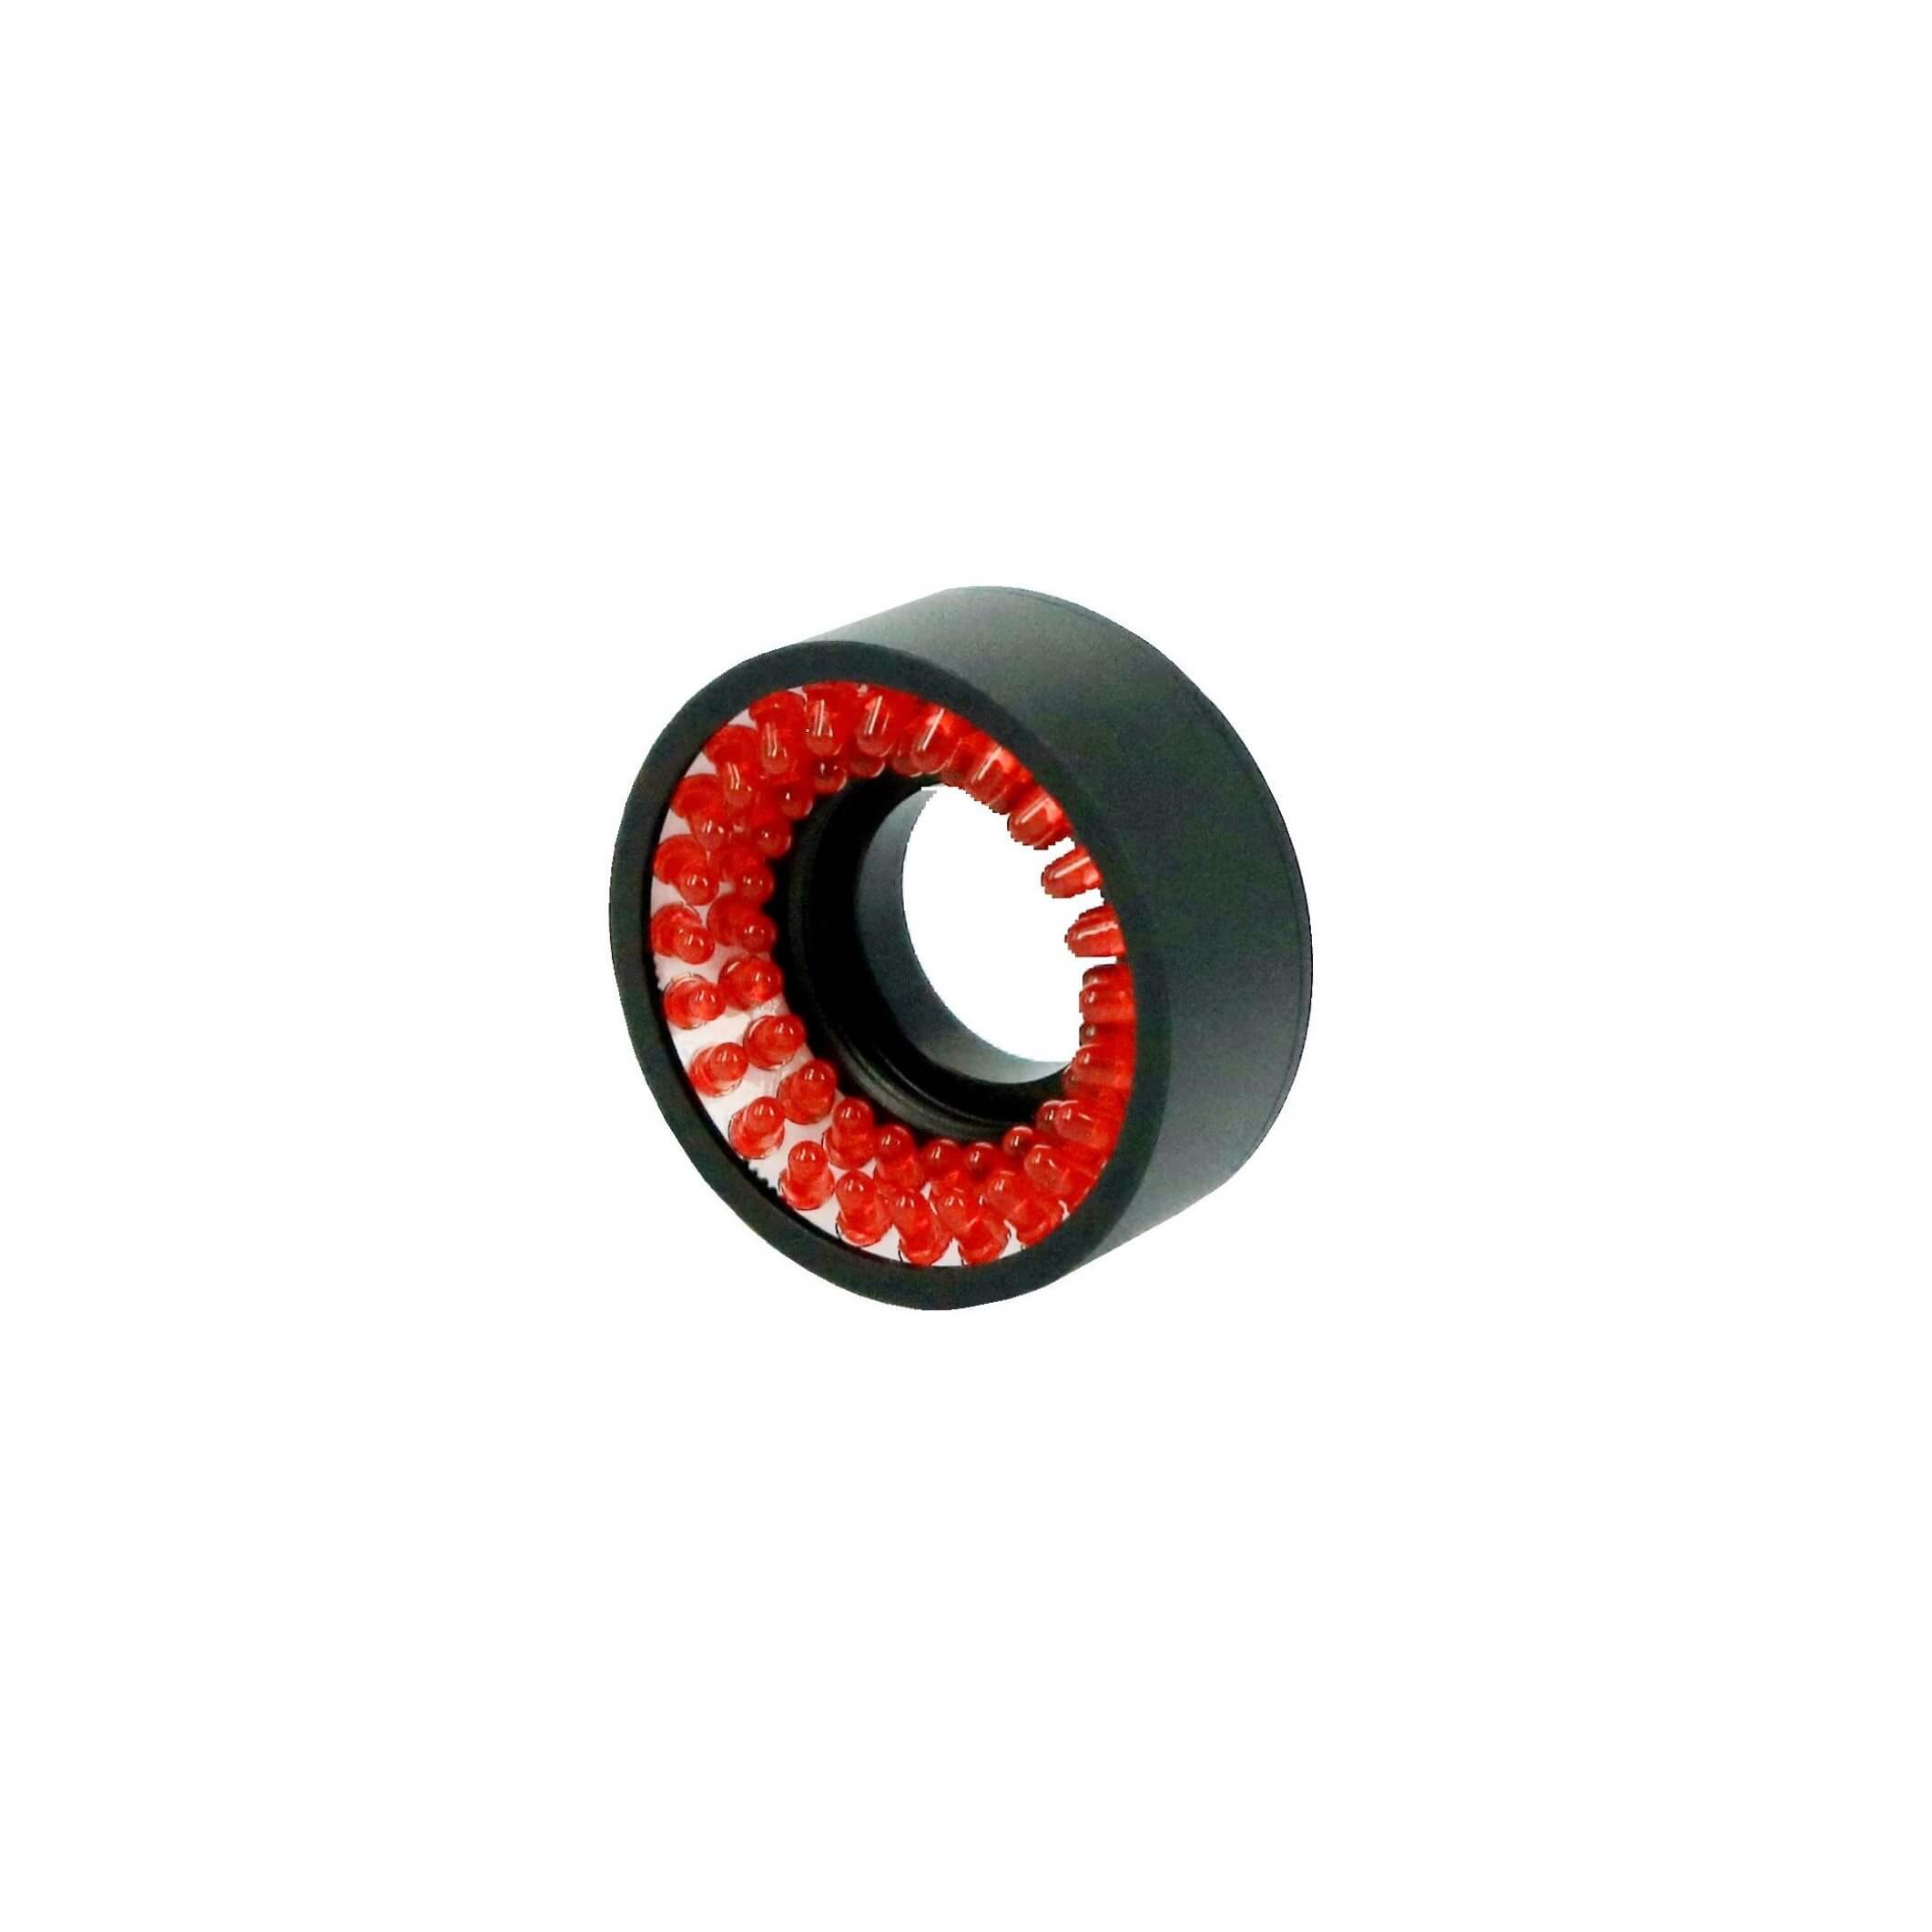 LDR-48/22 Low Angle Direct Ring Illumination – Red